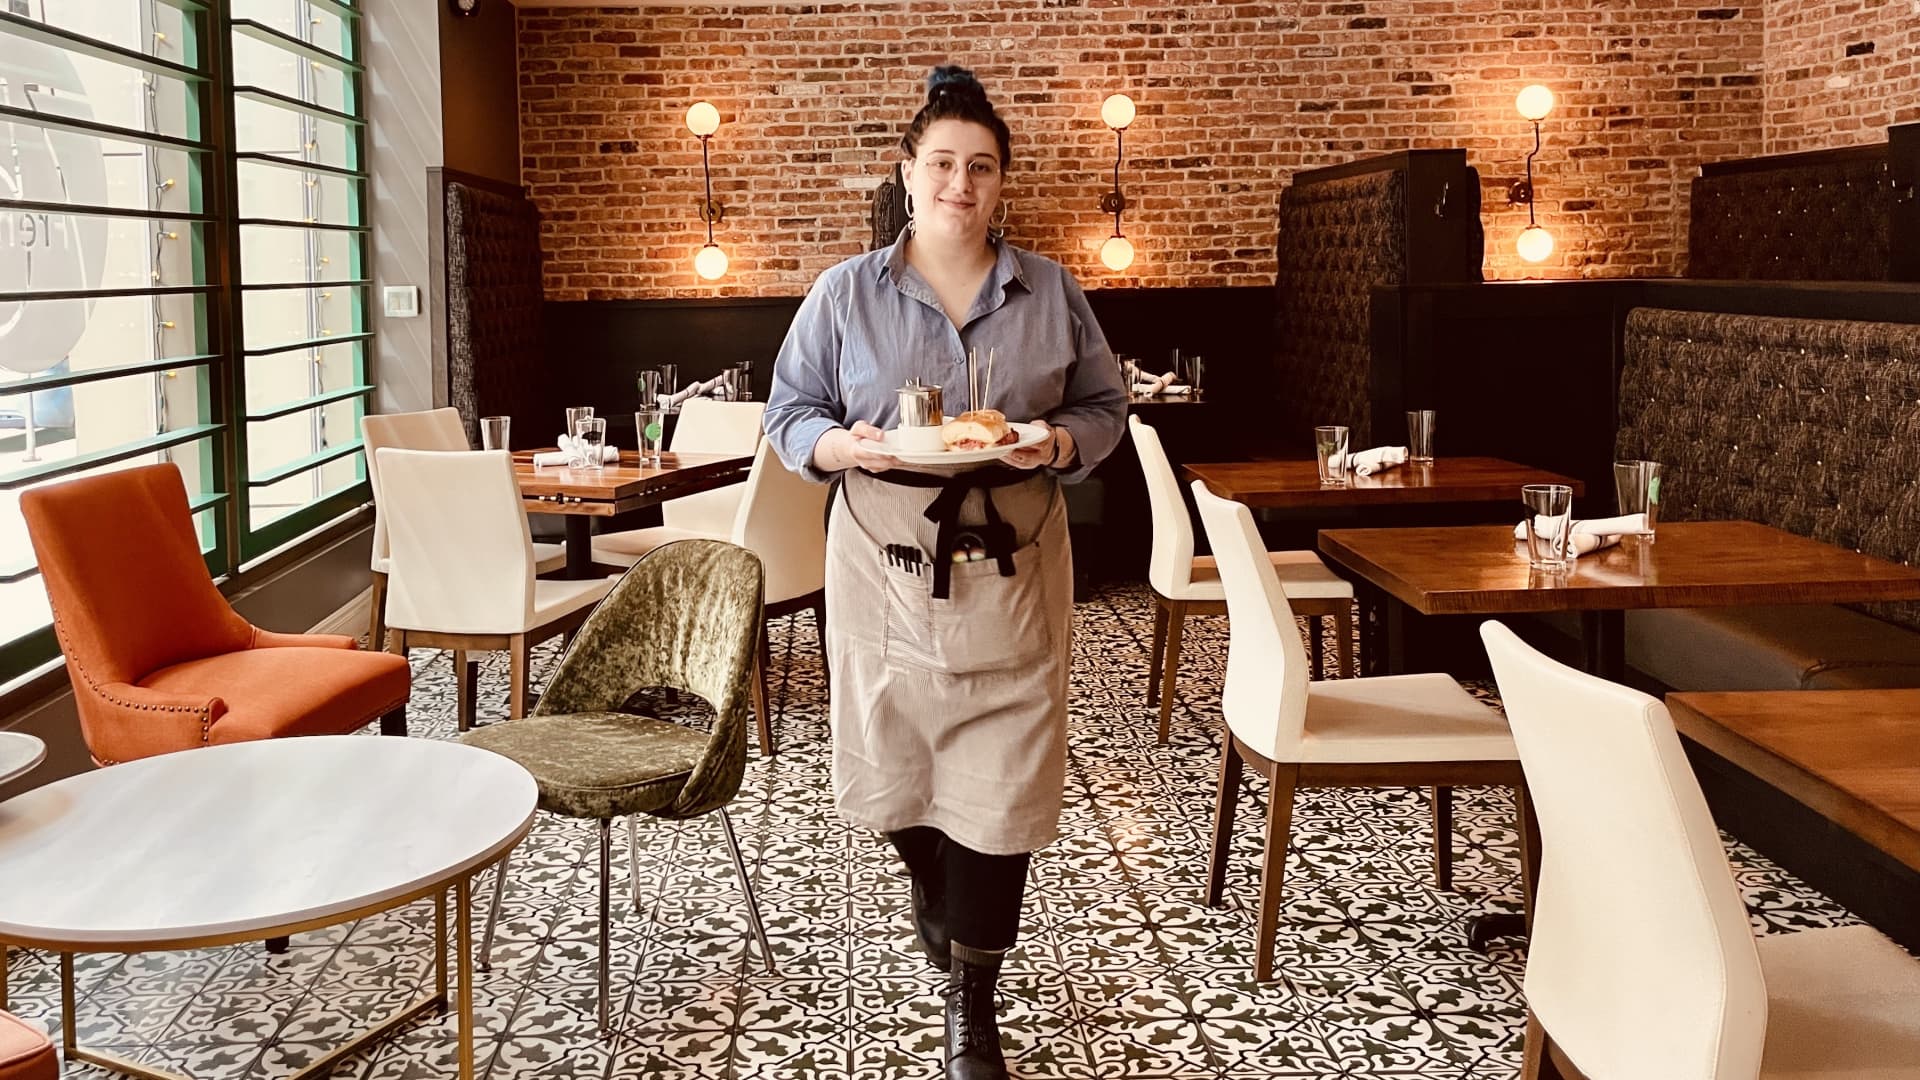 Nikki Perri has worked in the restaurant industry for about six years and has never had an accessible therapy benefit like she does now at Bonanno.